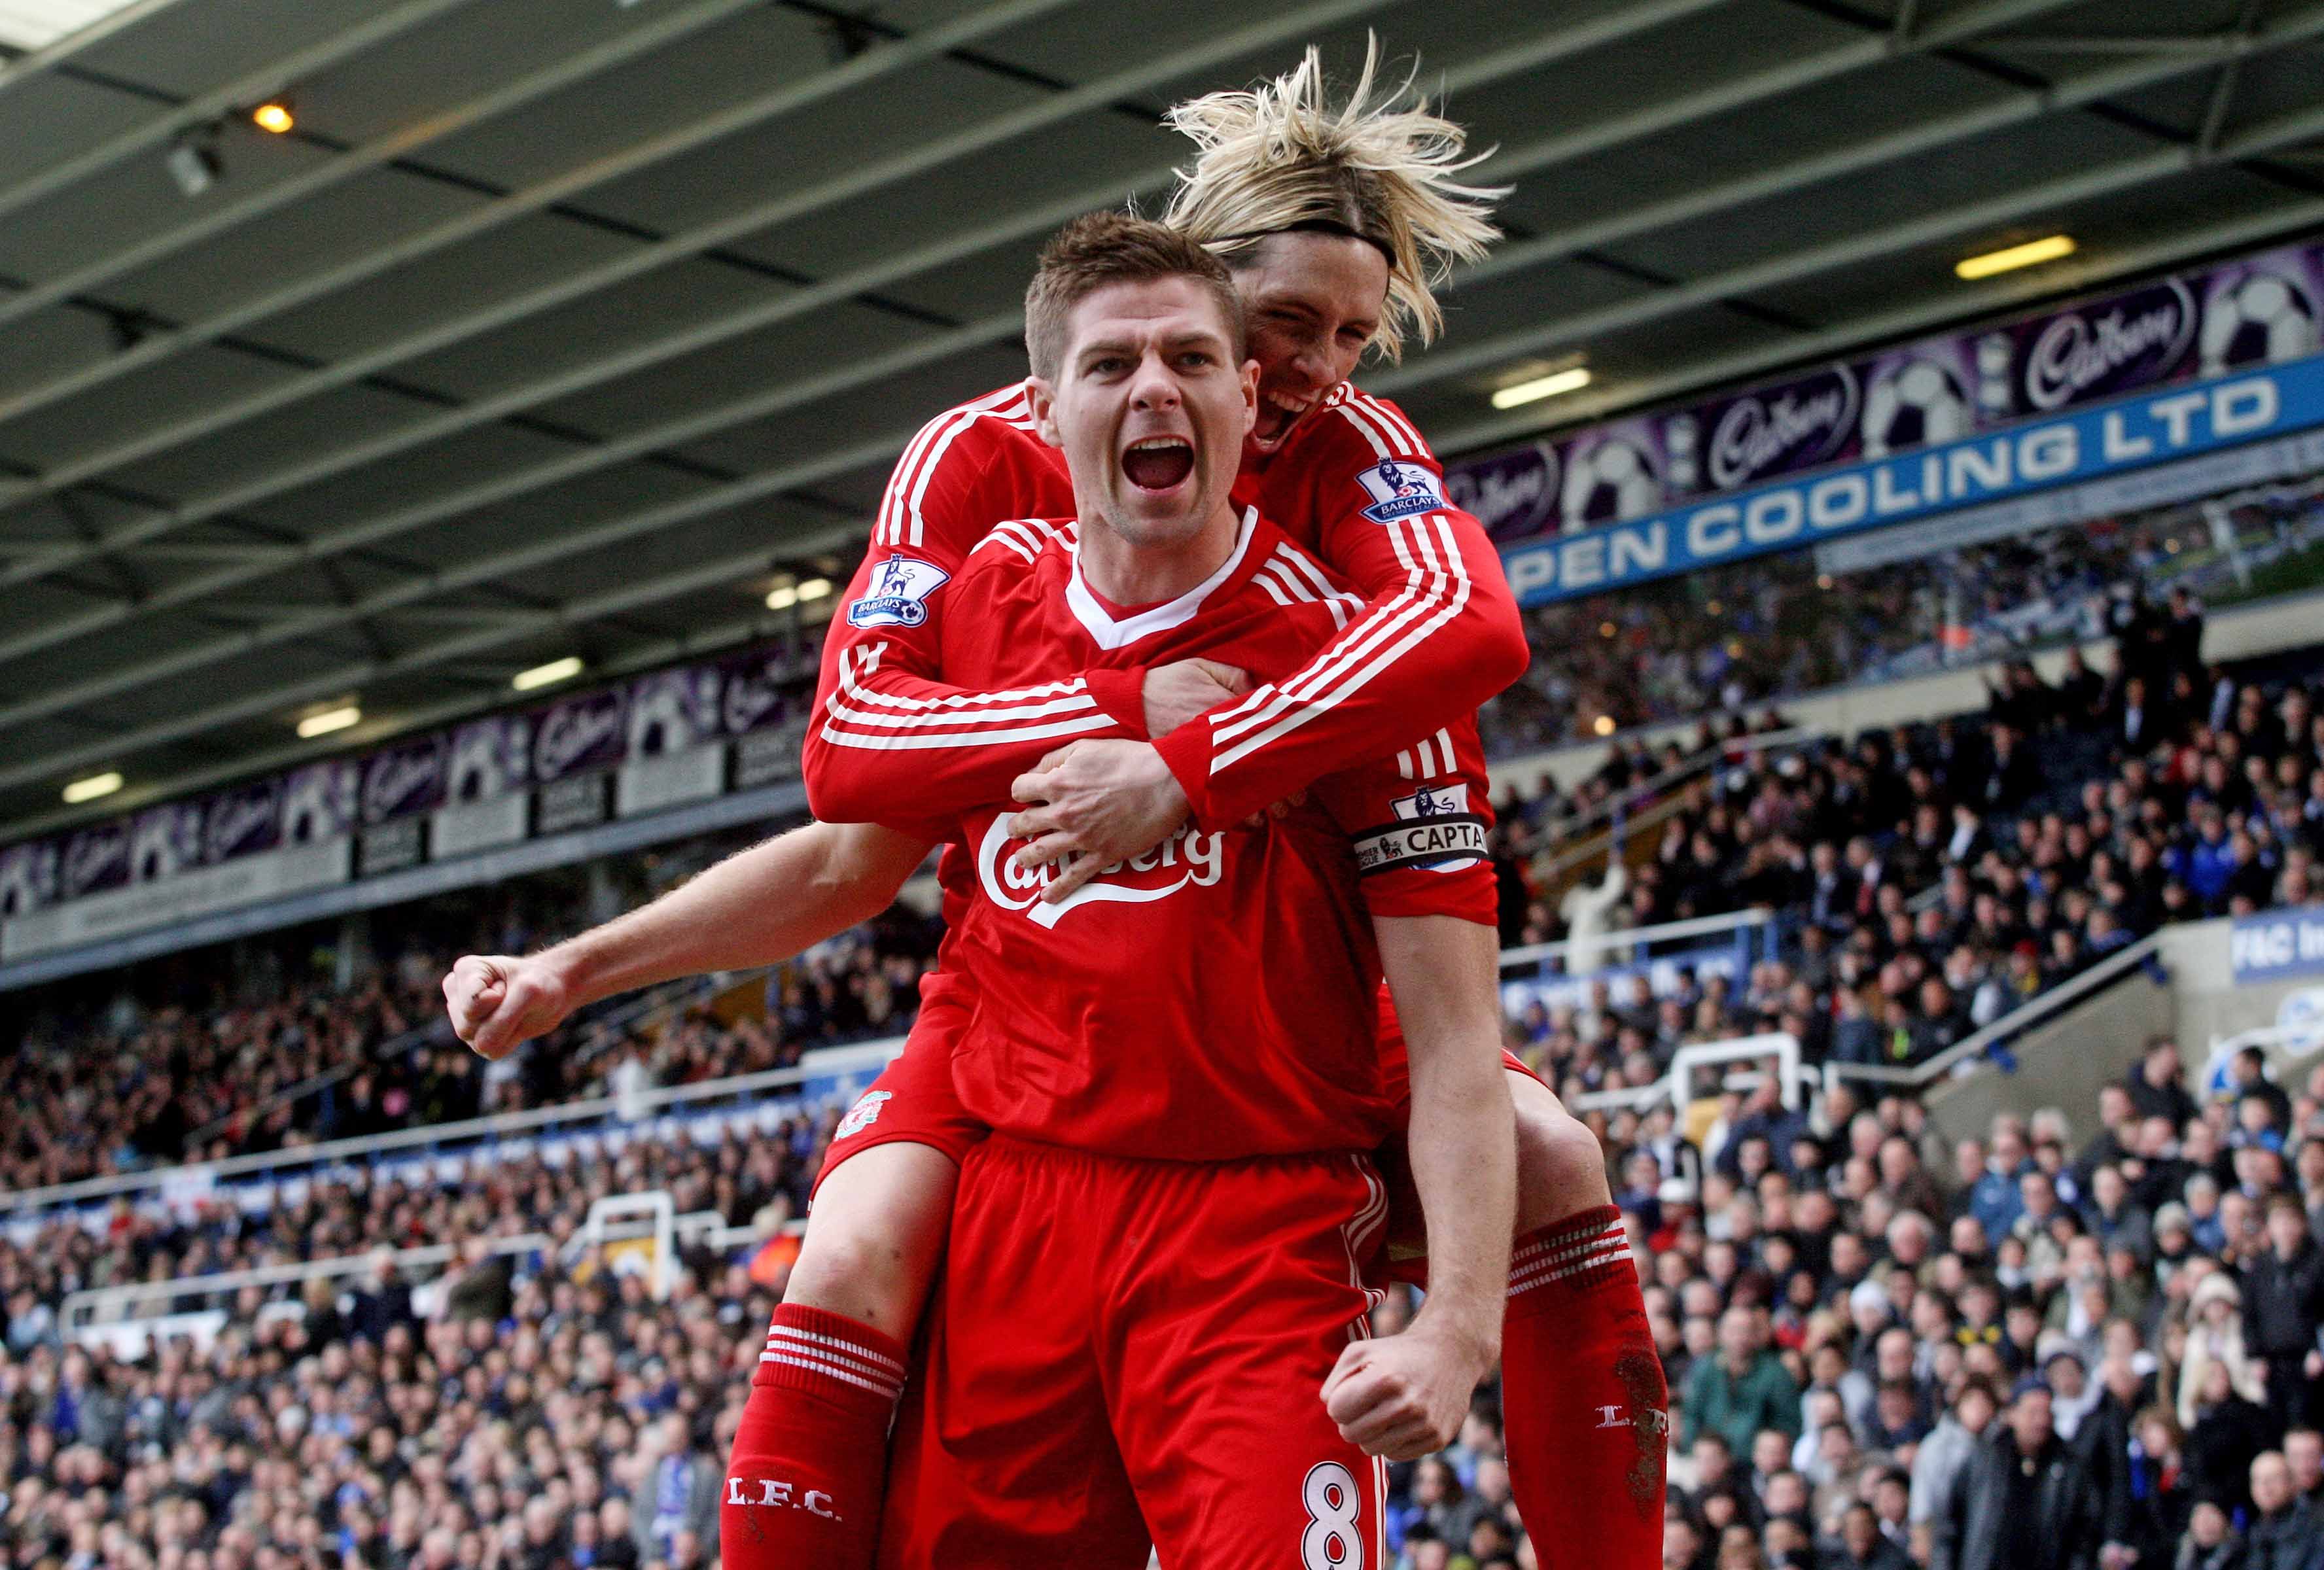 Football - Birmingham City v Liverpool Barclays Premier League - St Andrews - 09/10 - 4/4/10 
Steven Gerrard celebrates with Fernando Torres (R) after scoring Liverpool's first goal 
Mandatory Credit: Action Images / Scott Heavey 
Livepic 
NO ONLINE/INTERNET USE WITHOUT A LICENCE FROM THE FOOTBALL DATA CO LTD. FOR LICENCE ENQUIRIES PLEASE TELEPHONE +44 (0) 207 864 9000.